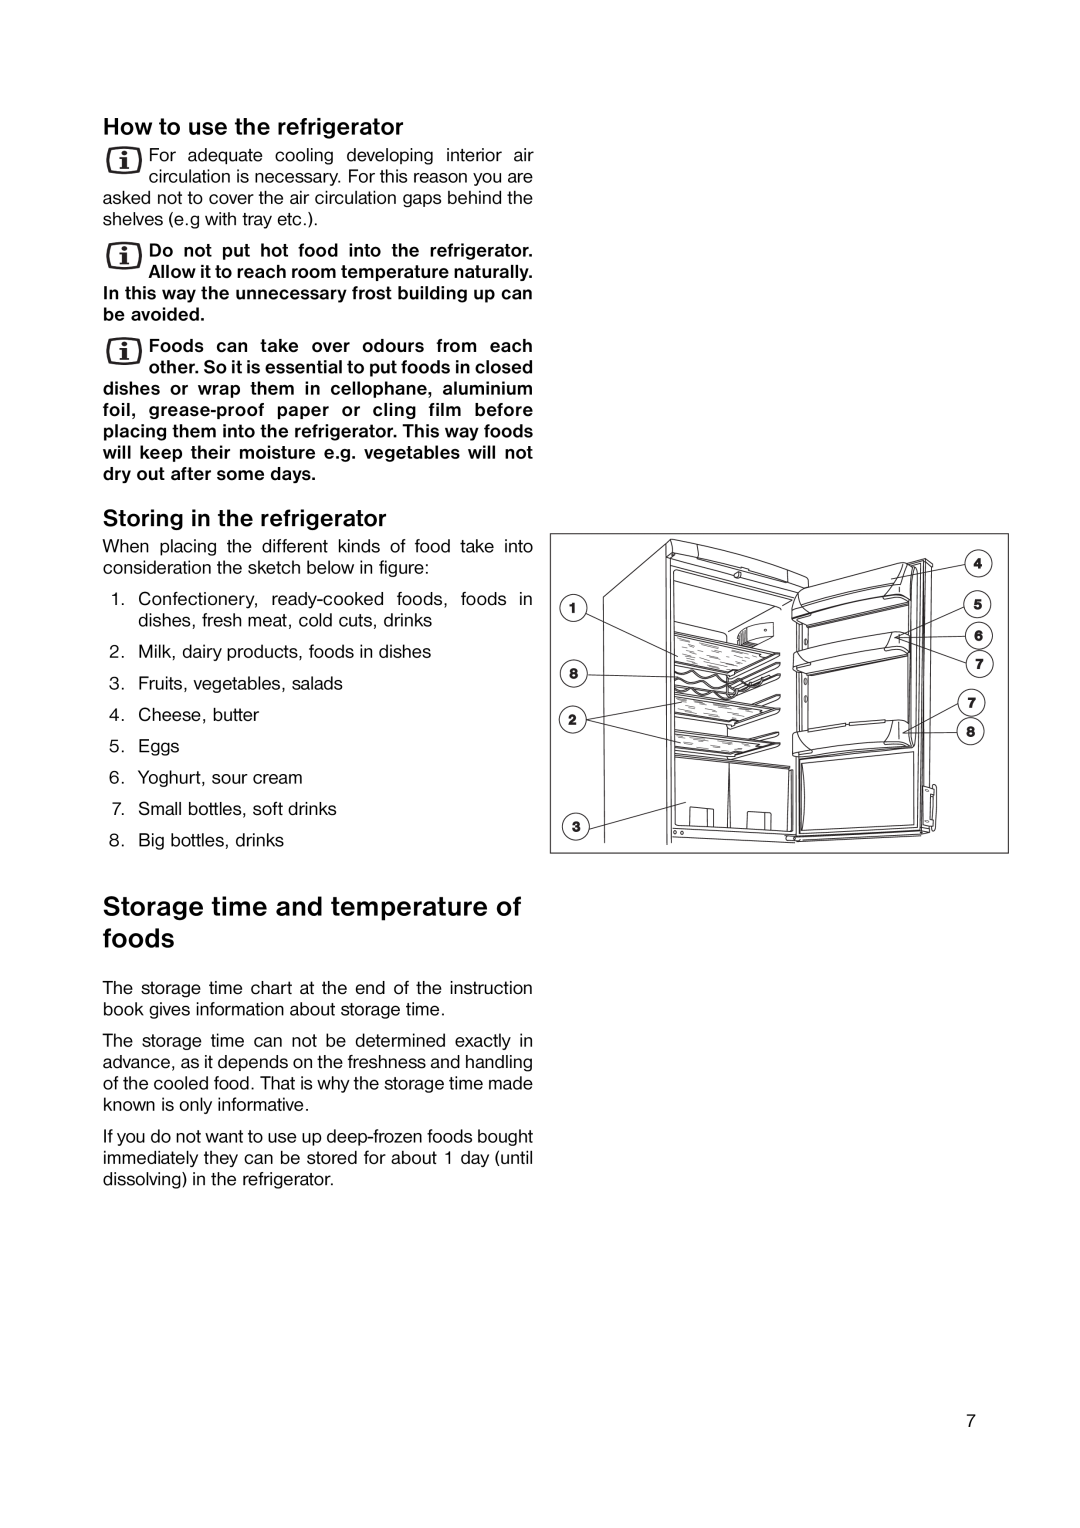 Zanussi ZERB 8643 manual Storage time and temperature of foods, How to use the refrigerator, Storing in the refrigerator 